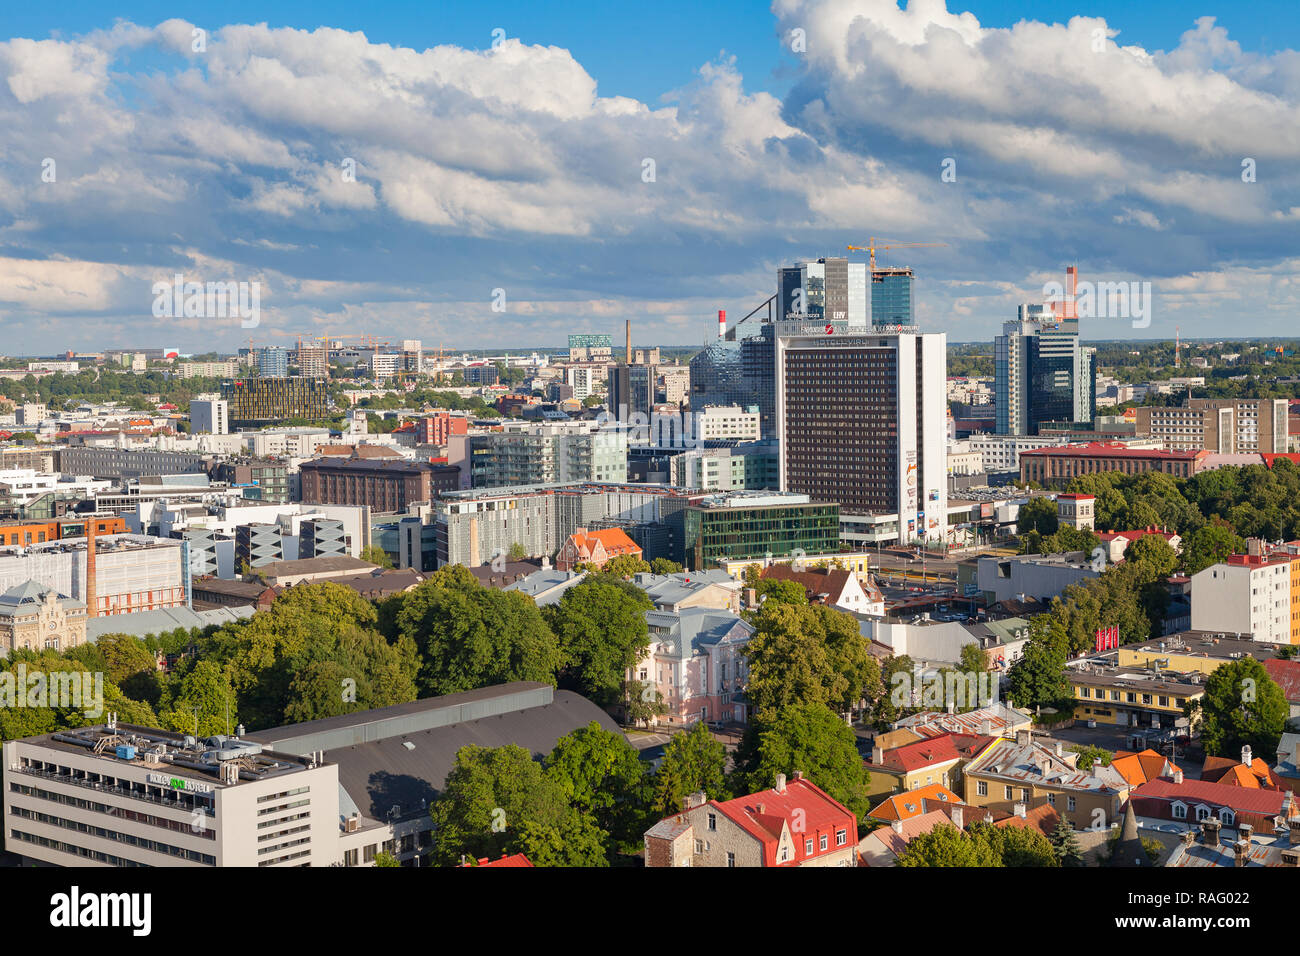 TALLINN, ESTONIA - AUGUST 1, 2017: Modern architecture: hotels and business centers Stock Photo